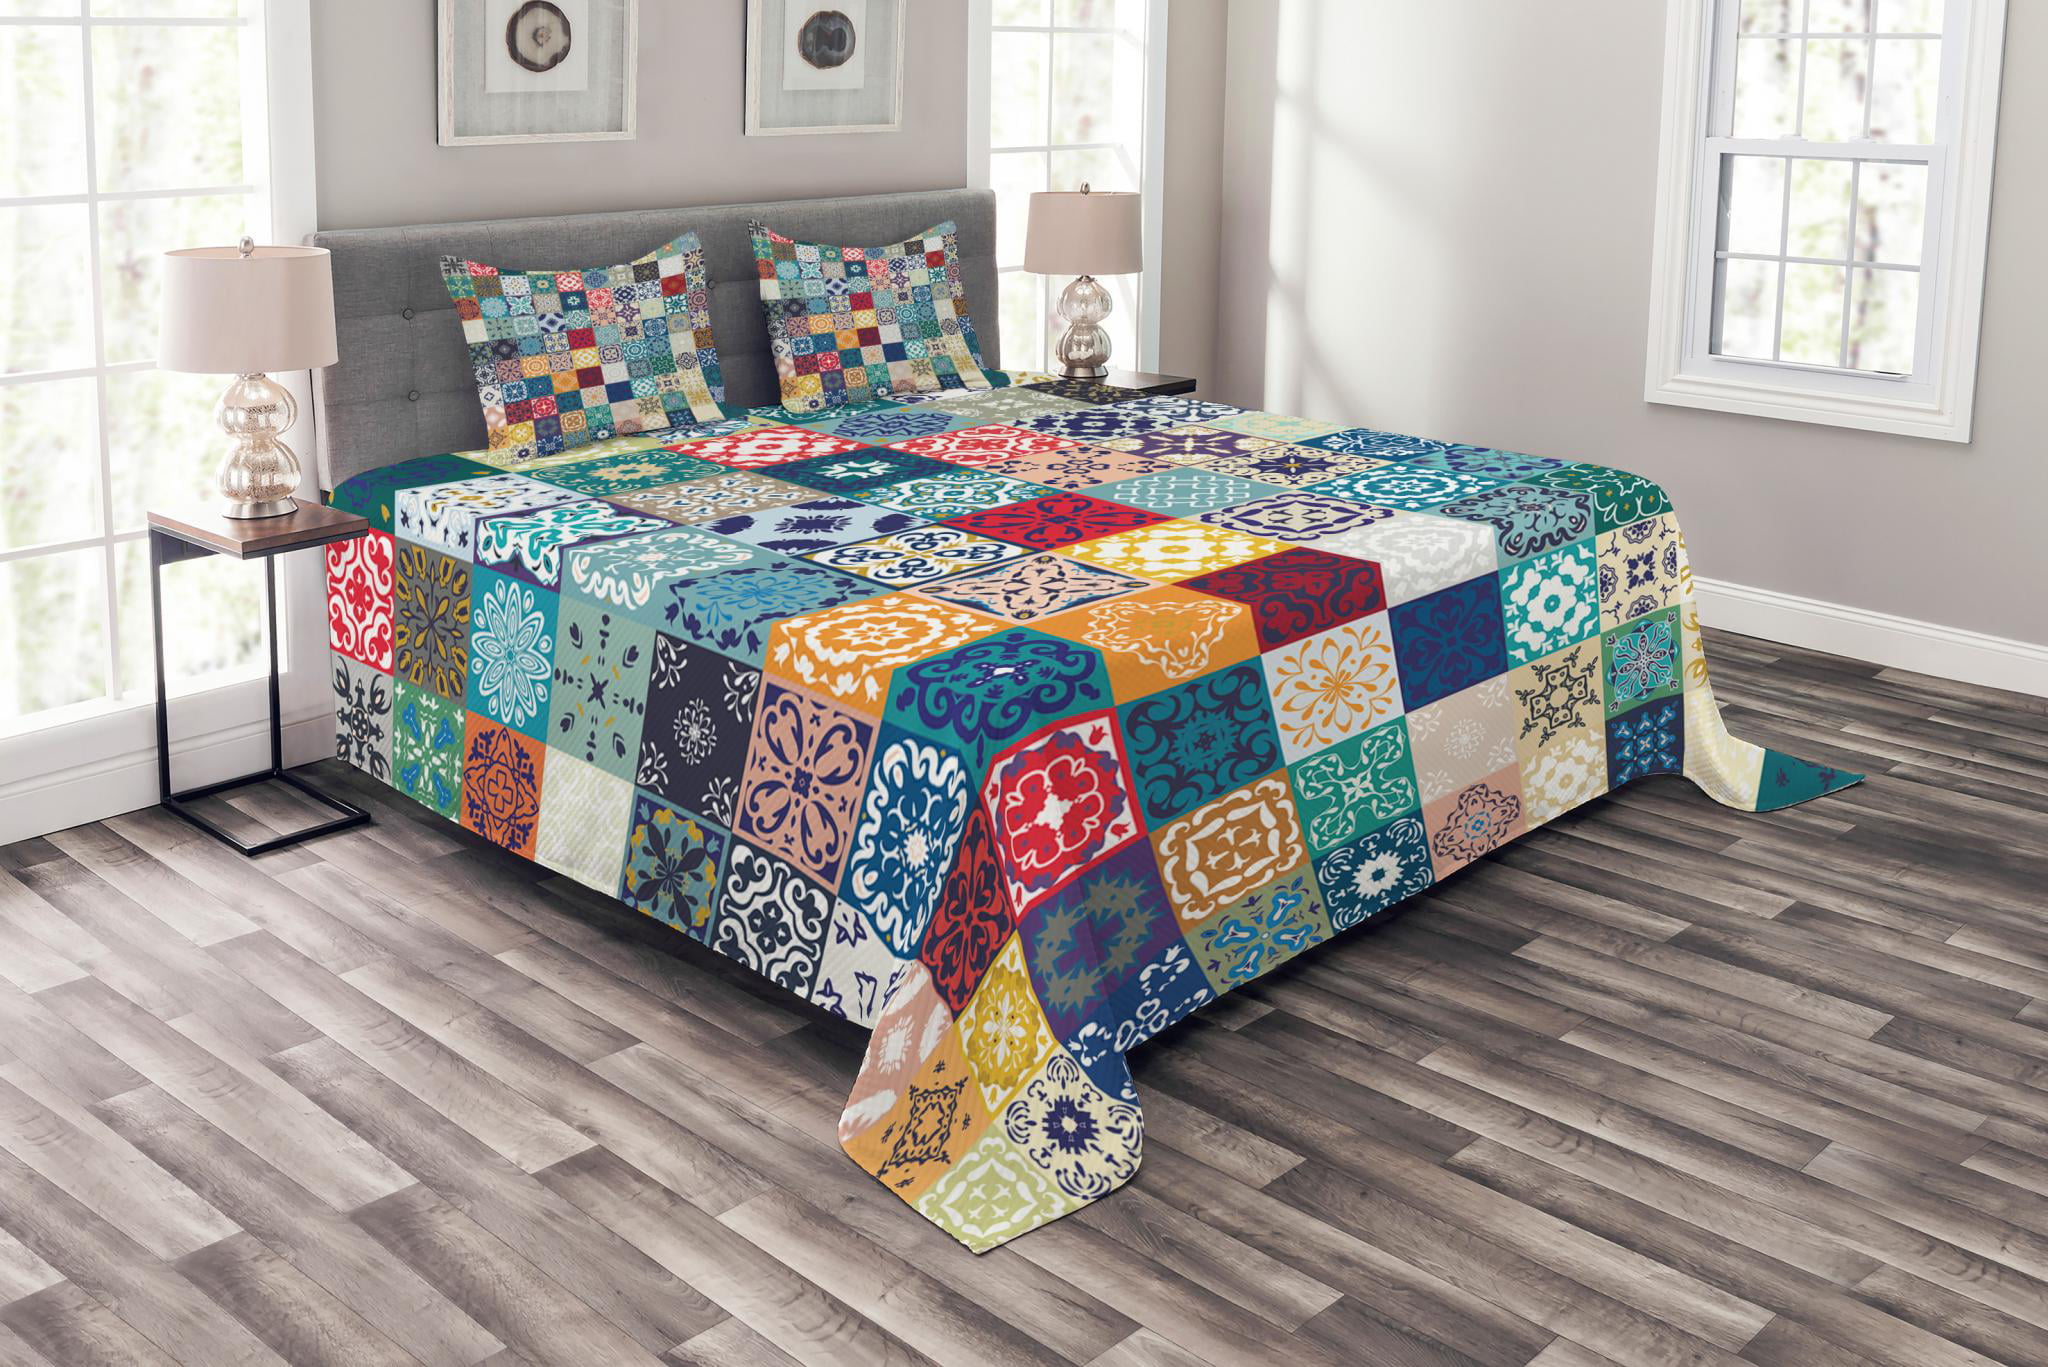 Details about   Queen/King Comforter Bedspread Quilt Set with 2 Pillows Sham Patchwork Bed Cover 